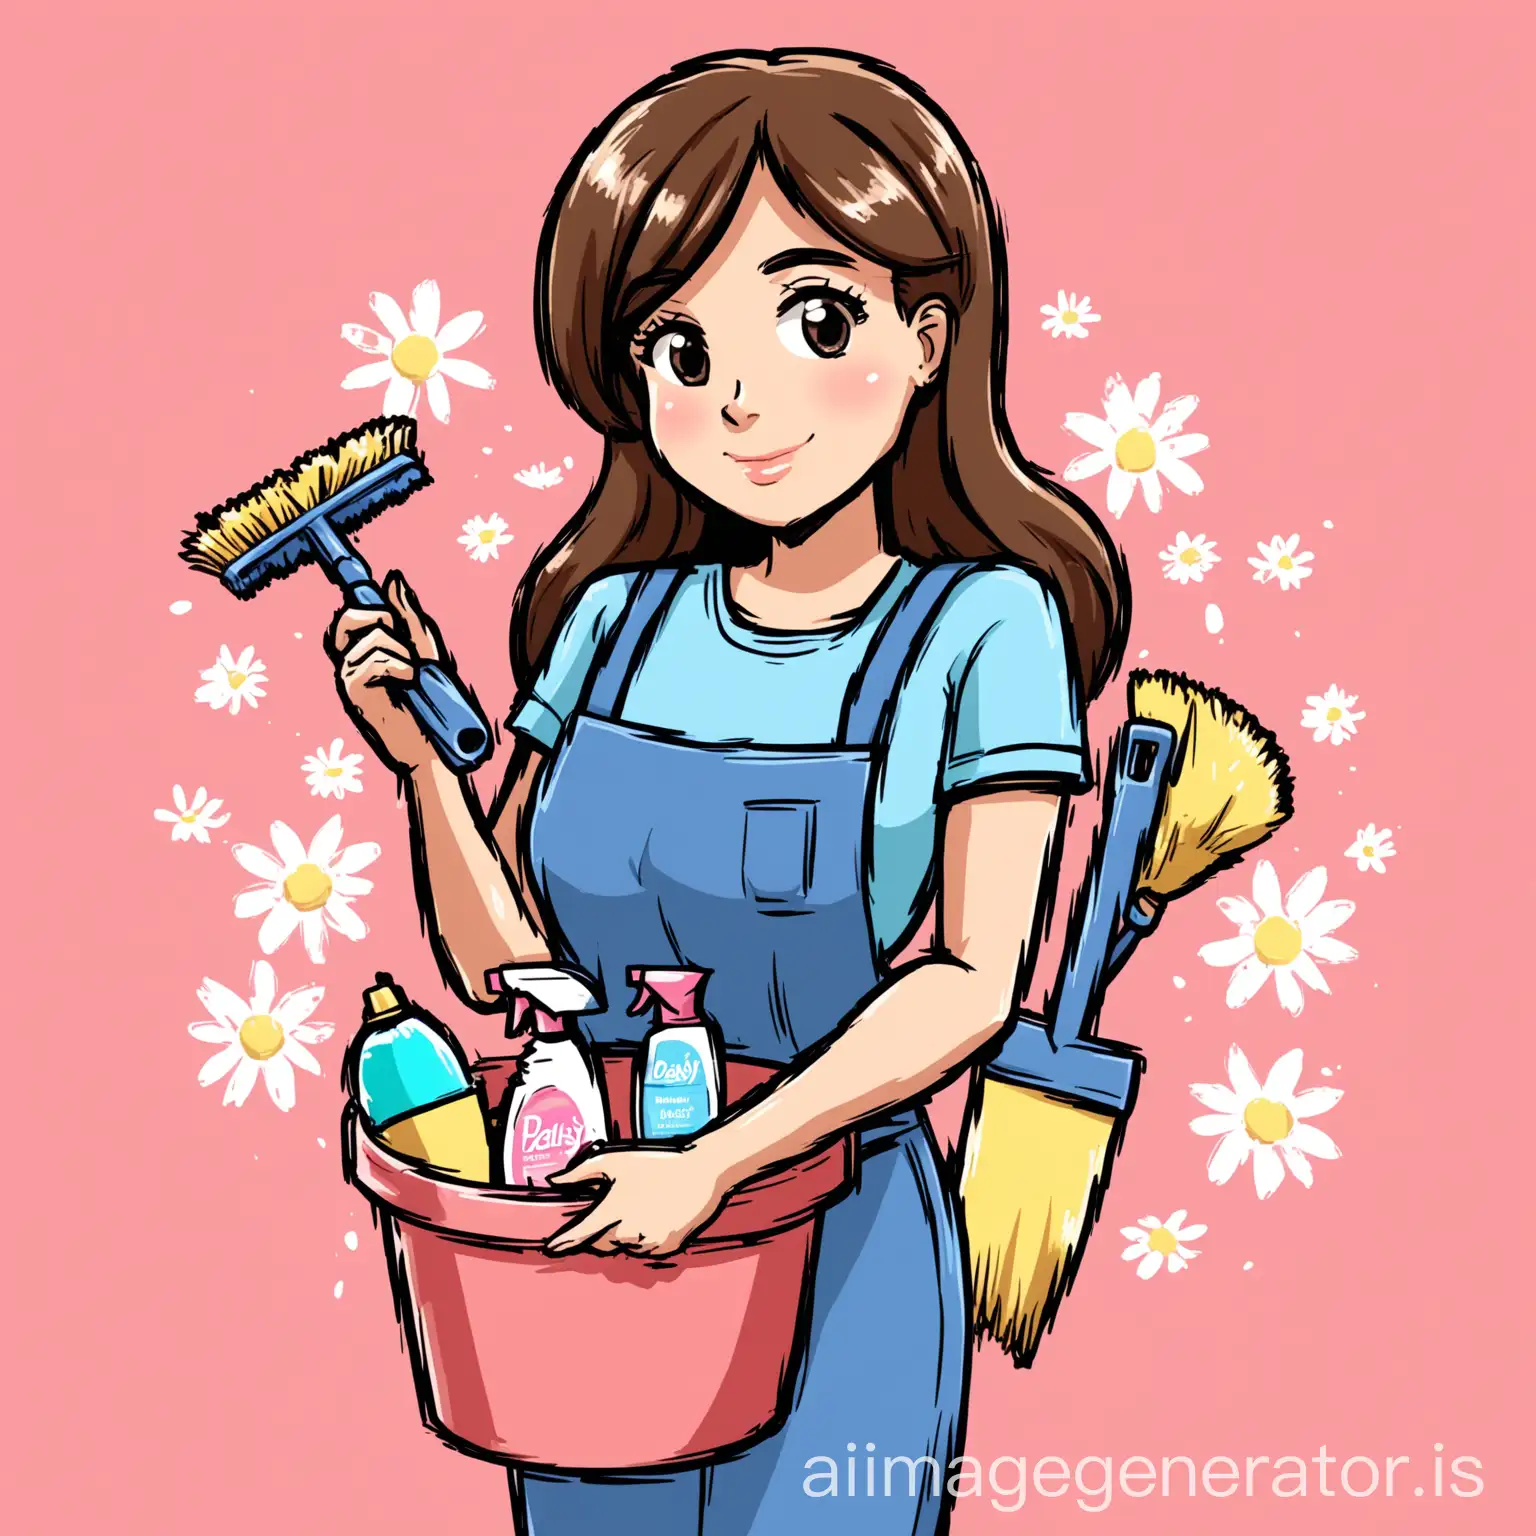 Woman-Cleaner-Holding-Bucket-with-Cleaning-Products-Cartoon-Brown-Hair-with-Blonde-Streaks-Pink-Background